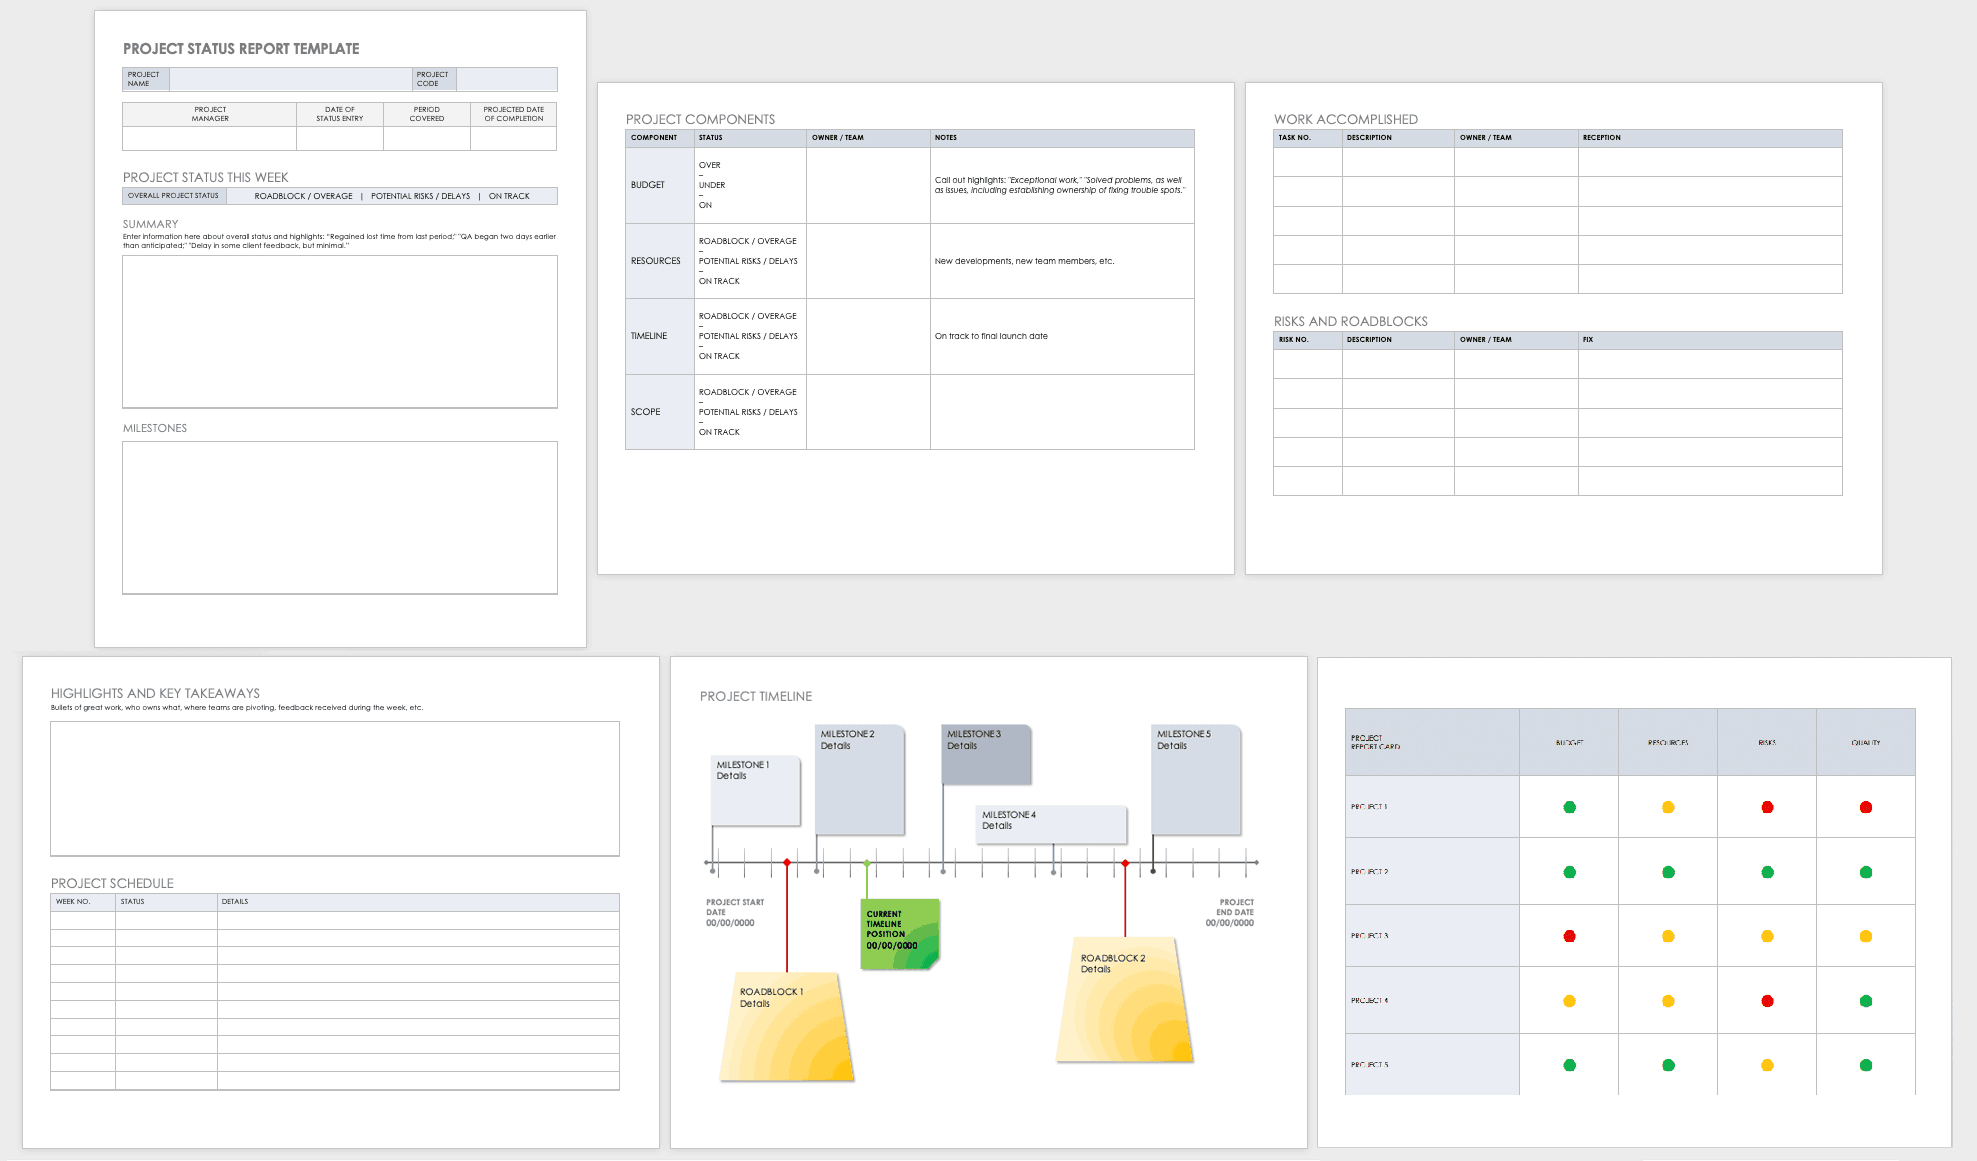 Free Project Report Templates | Smartsheet Throughout Customer Visit Report Format Templates